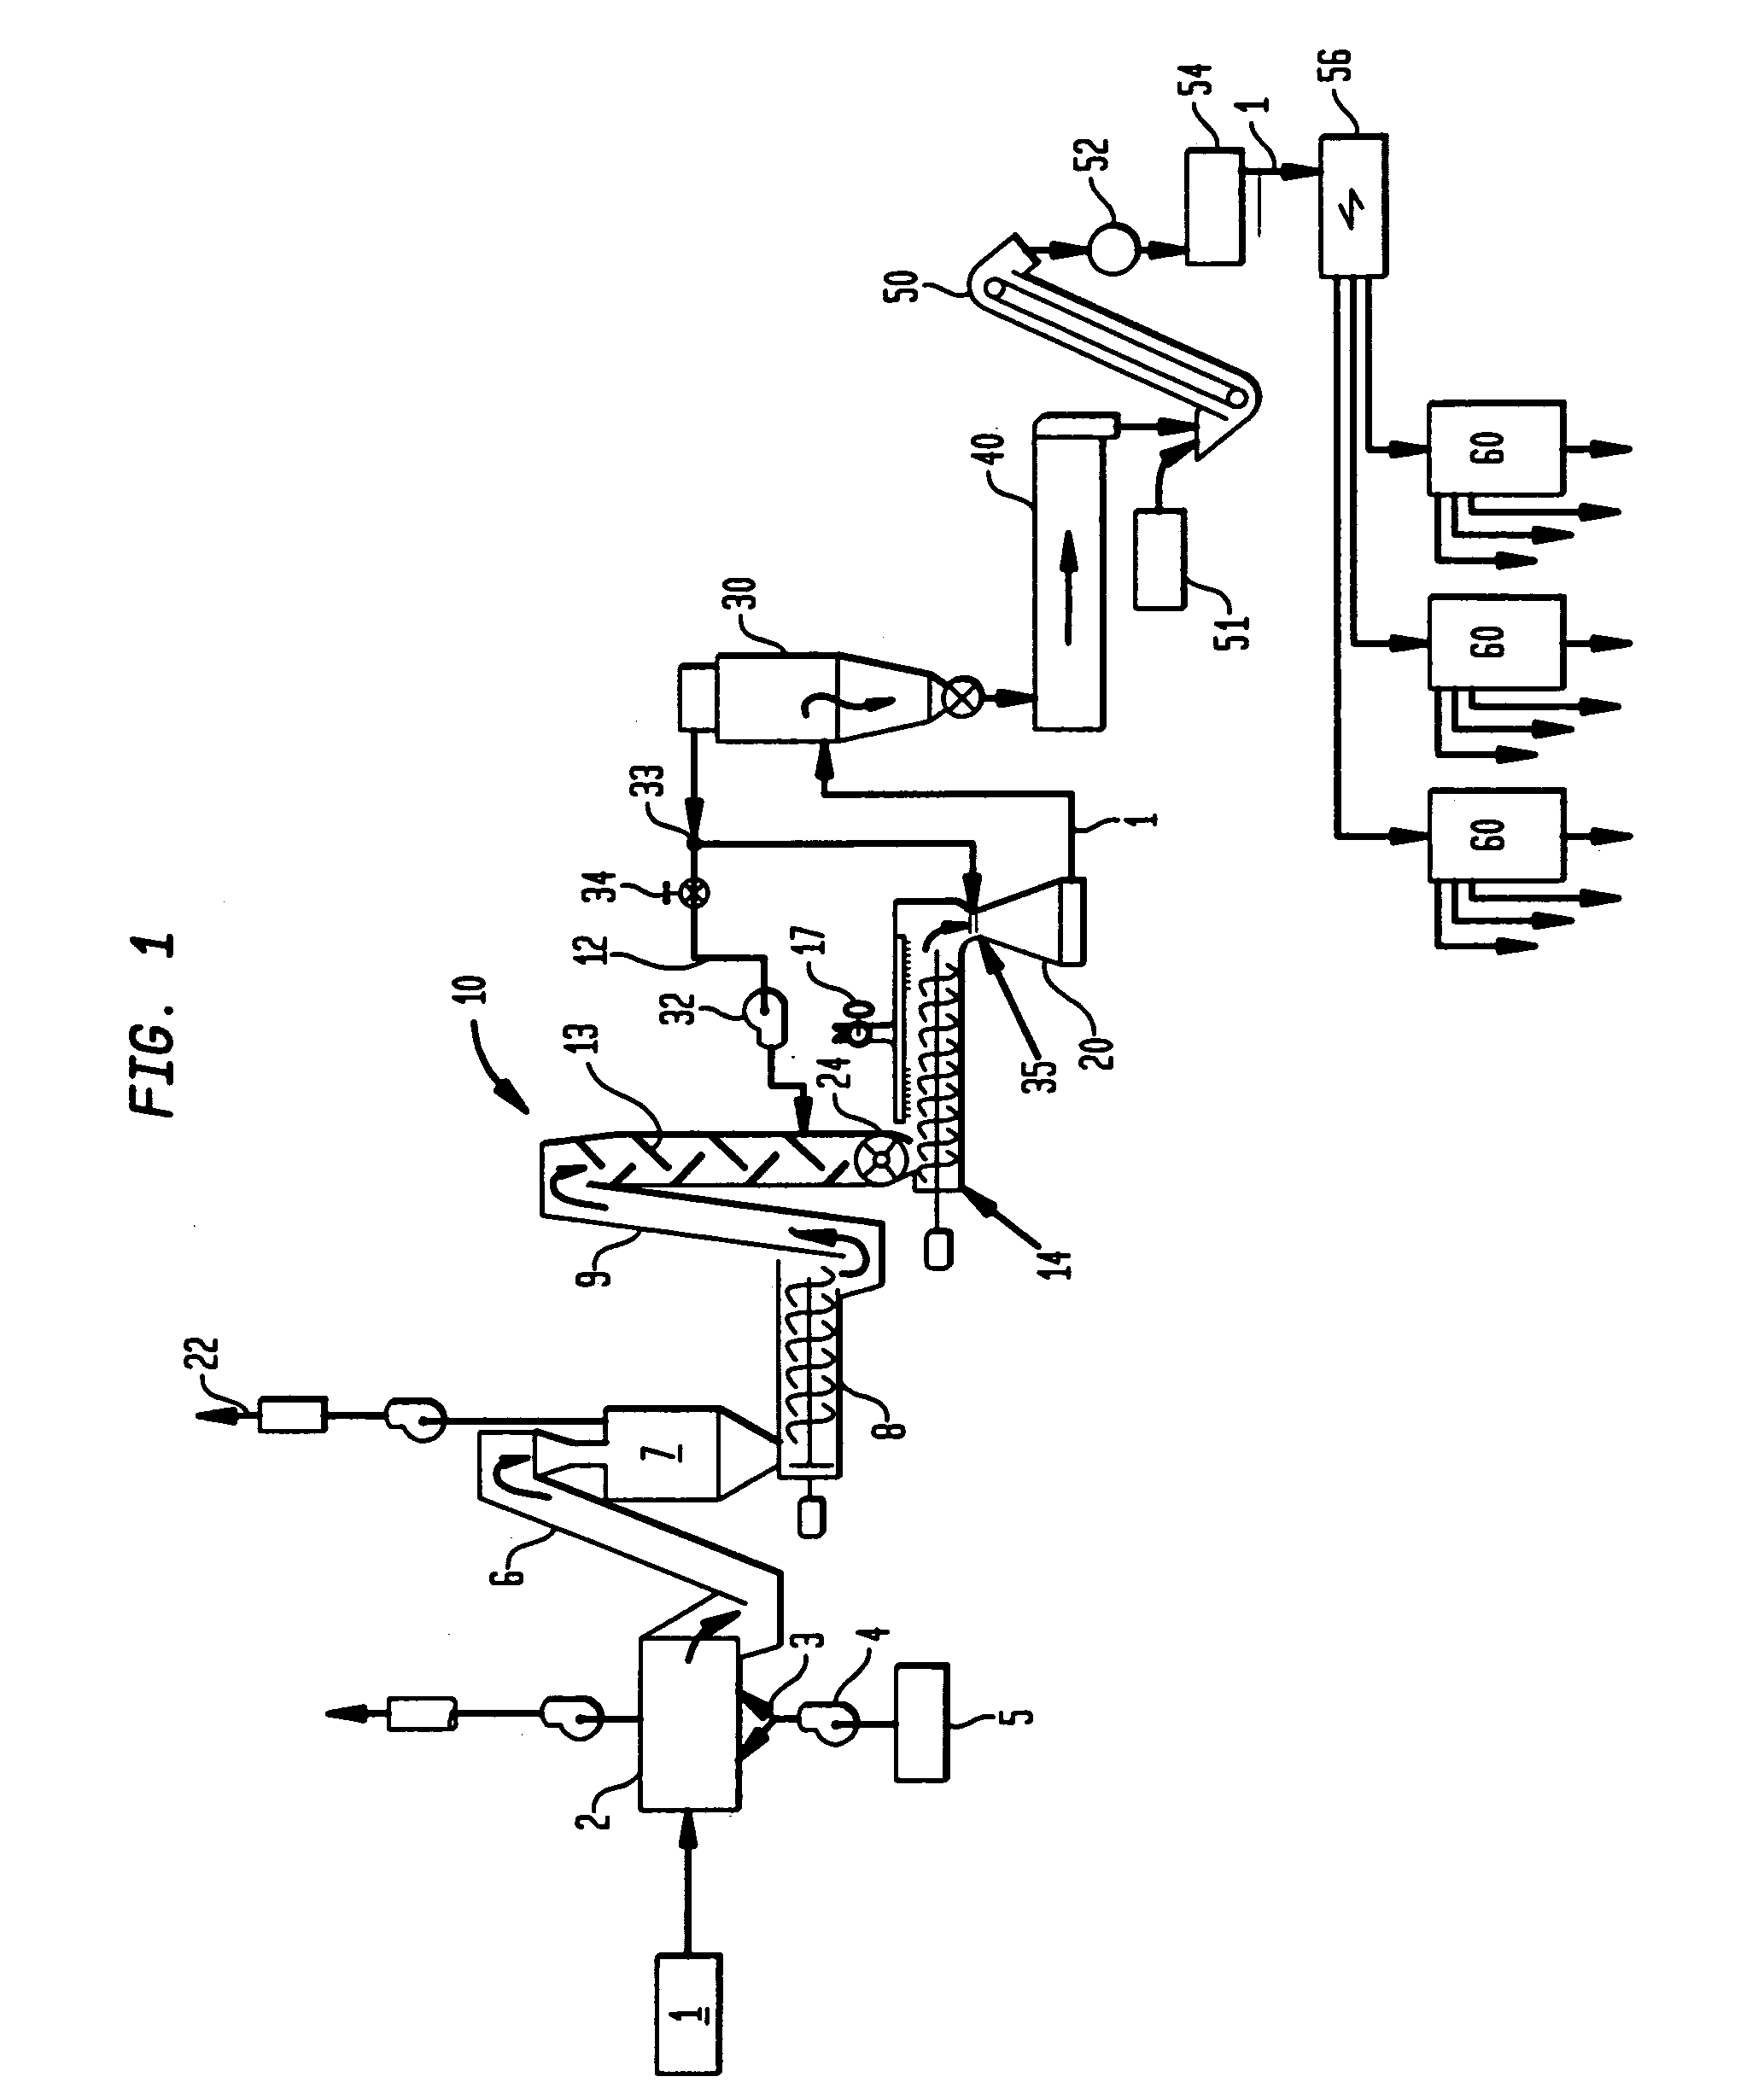 Process and apparatus for manufacturing powder rubber